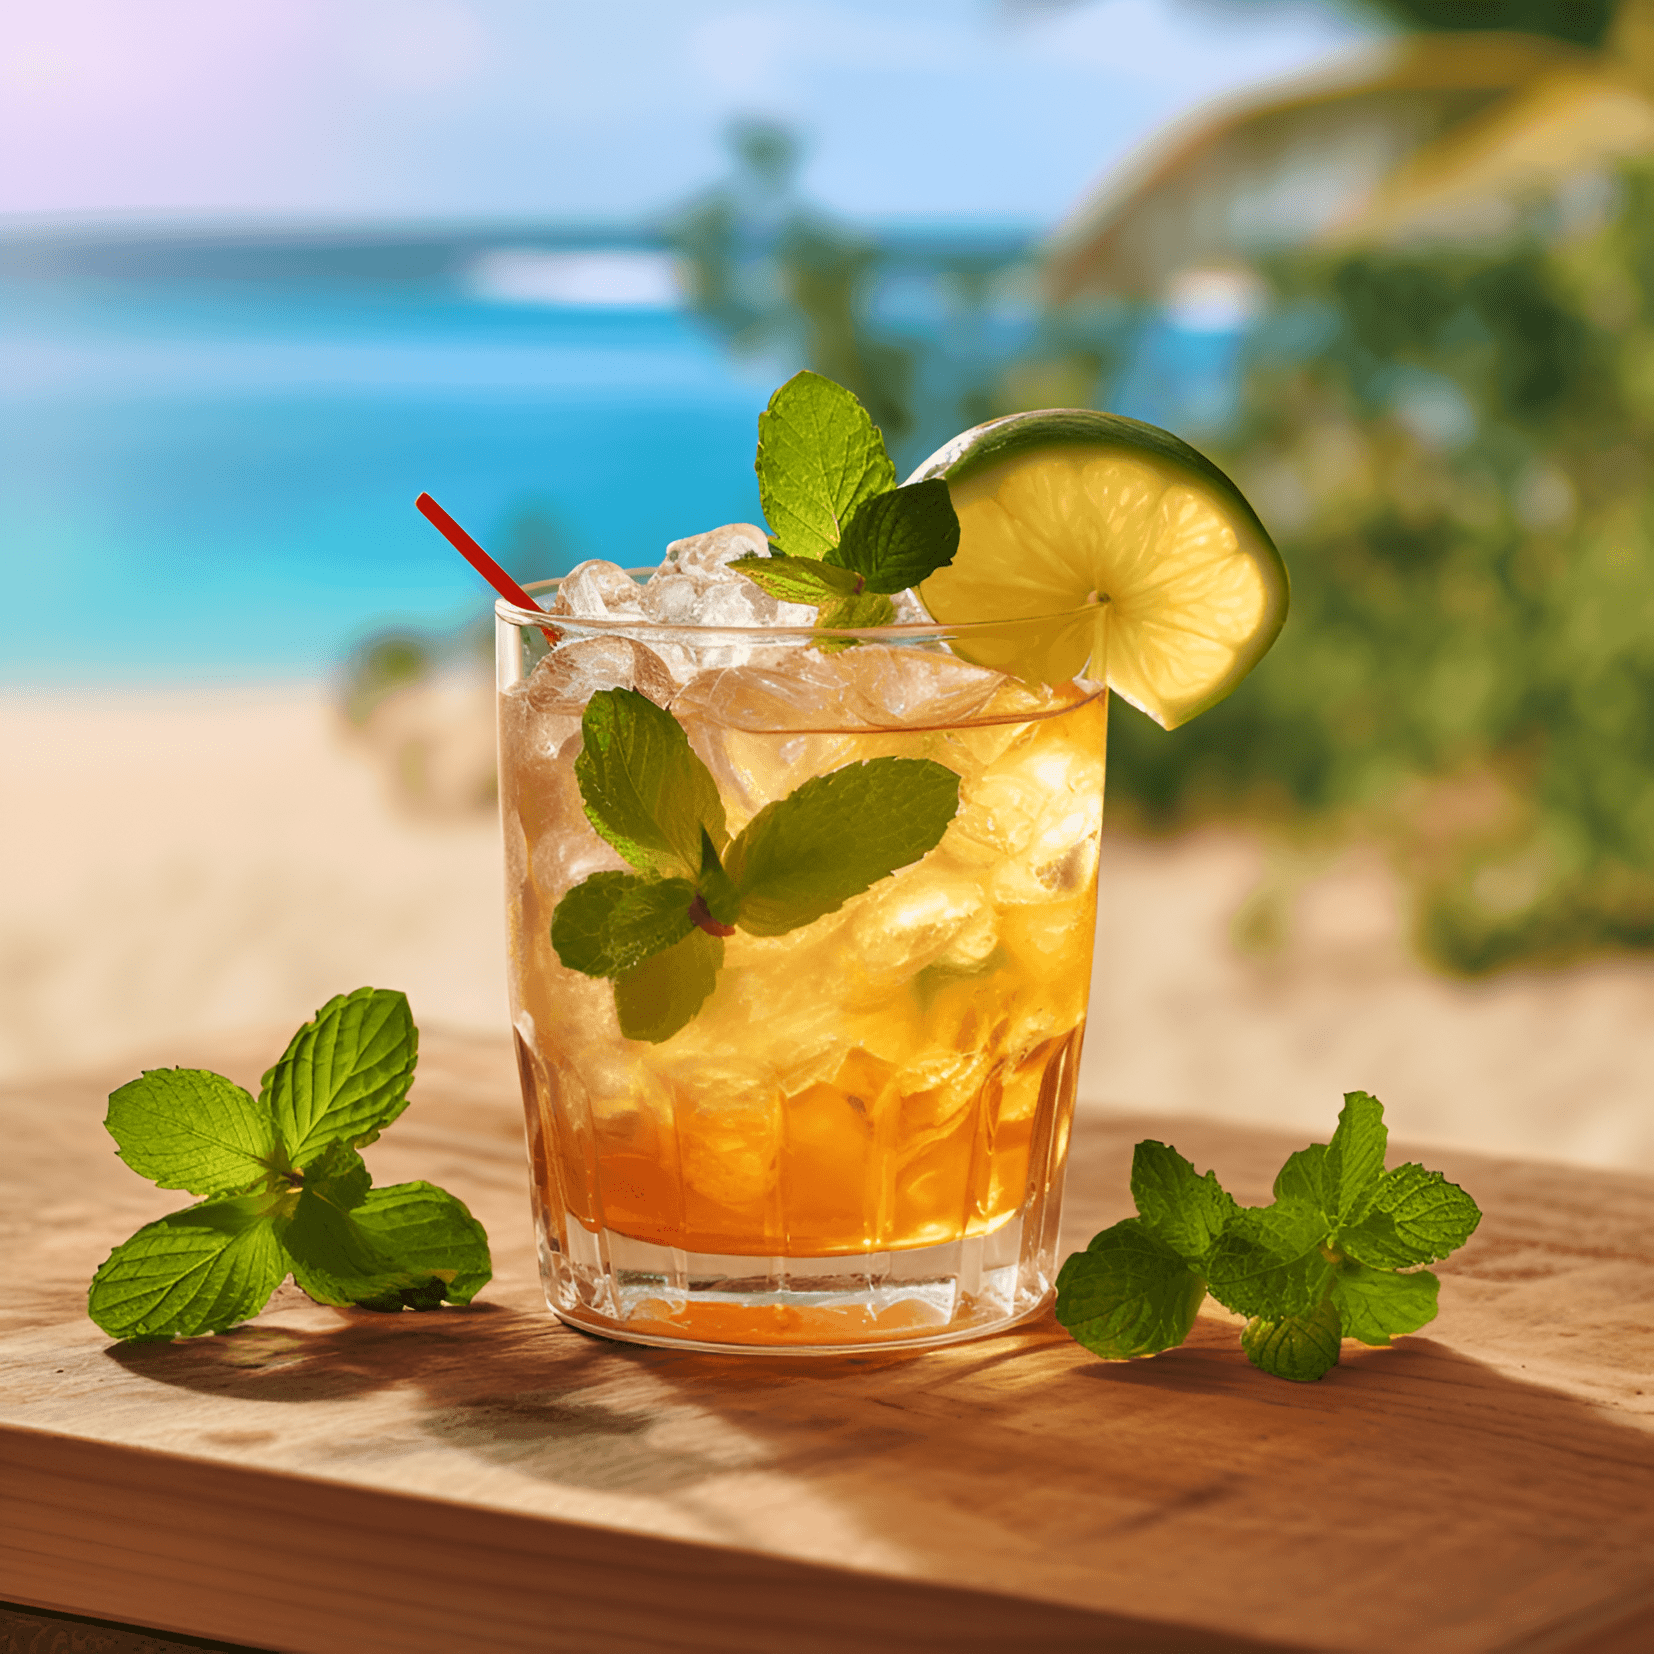 Mai Tai (Trader Vic's) Cocktail Recipe - The Mai Tai has a well-balanced, sweet, and tangy flavor profile with a hint of almond from the orgeat syrup. The combination of light and dark rums gives it a smooth, rich taste with a subtle hint of oakiness.